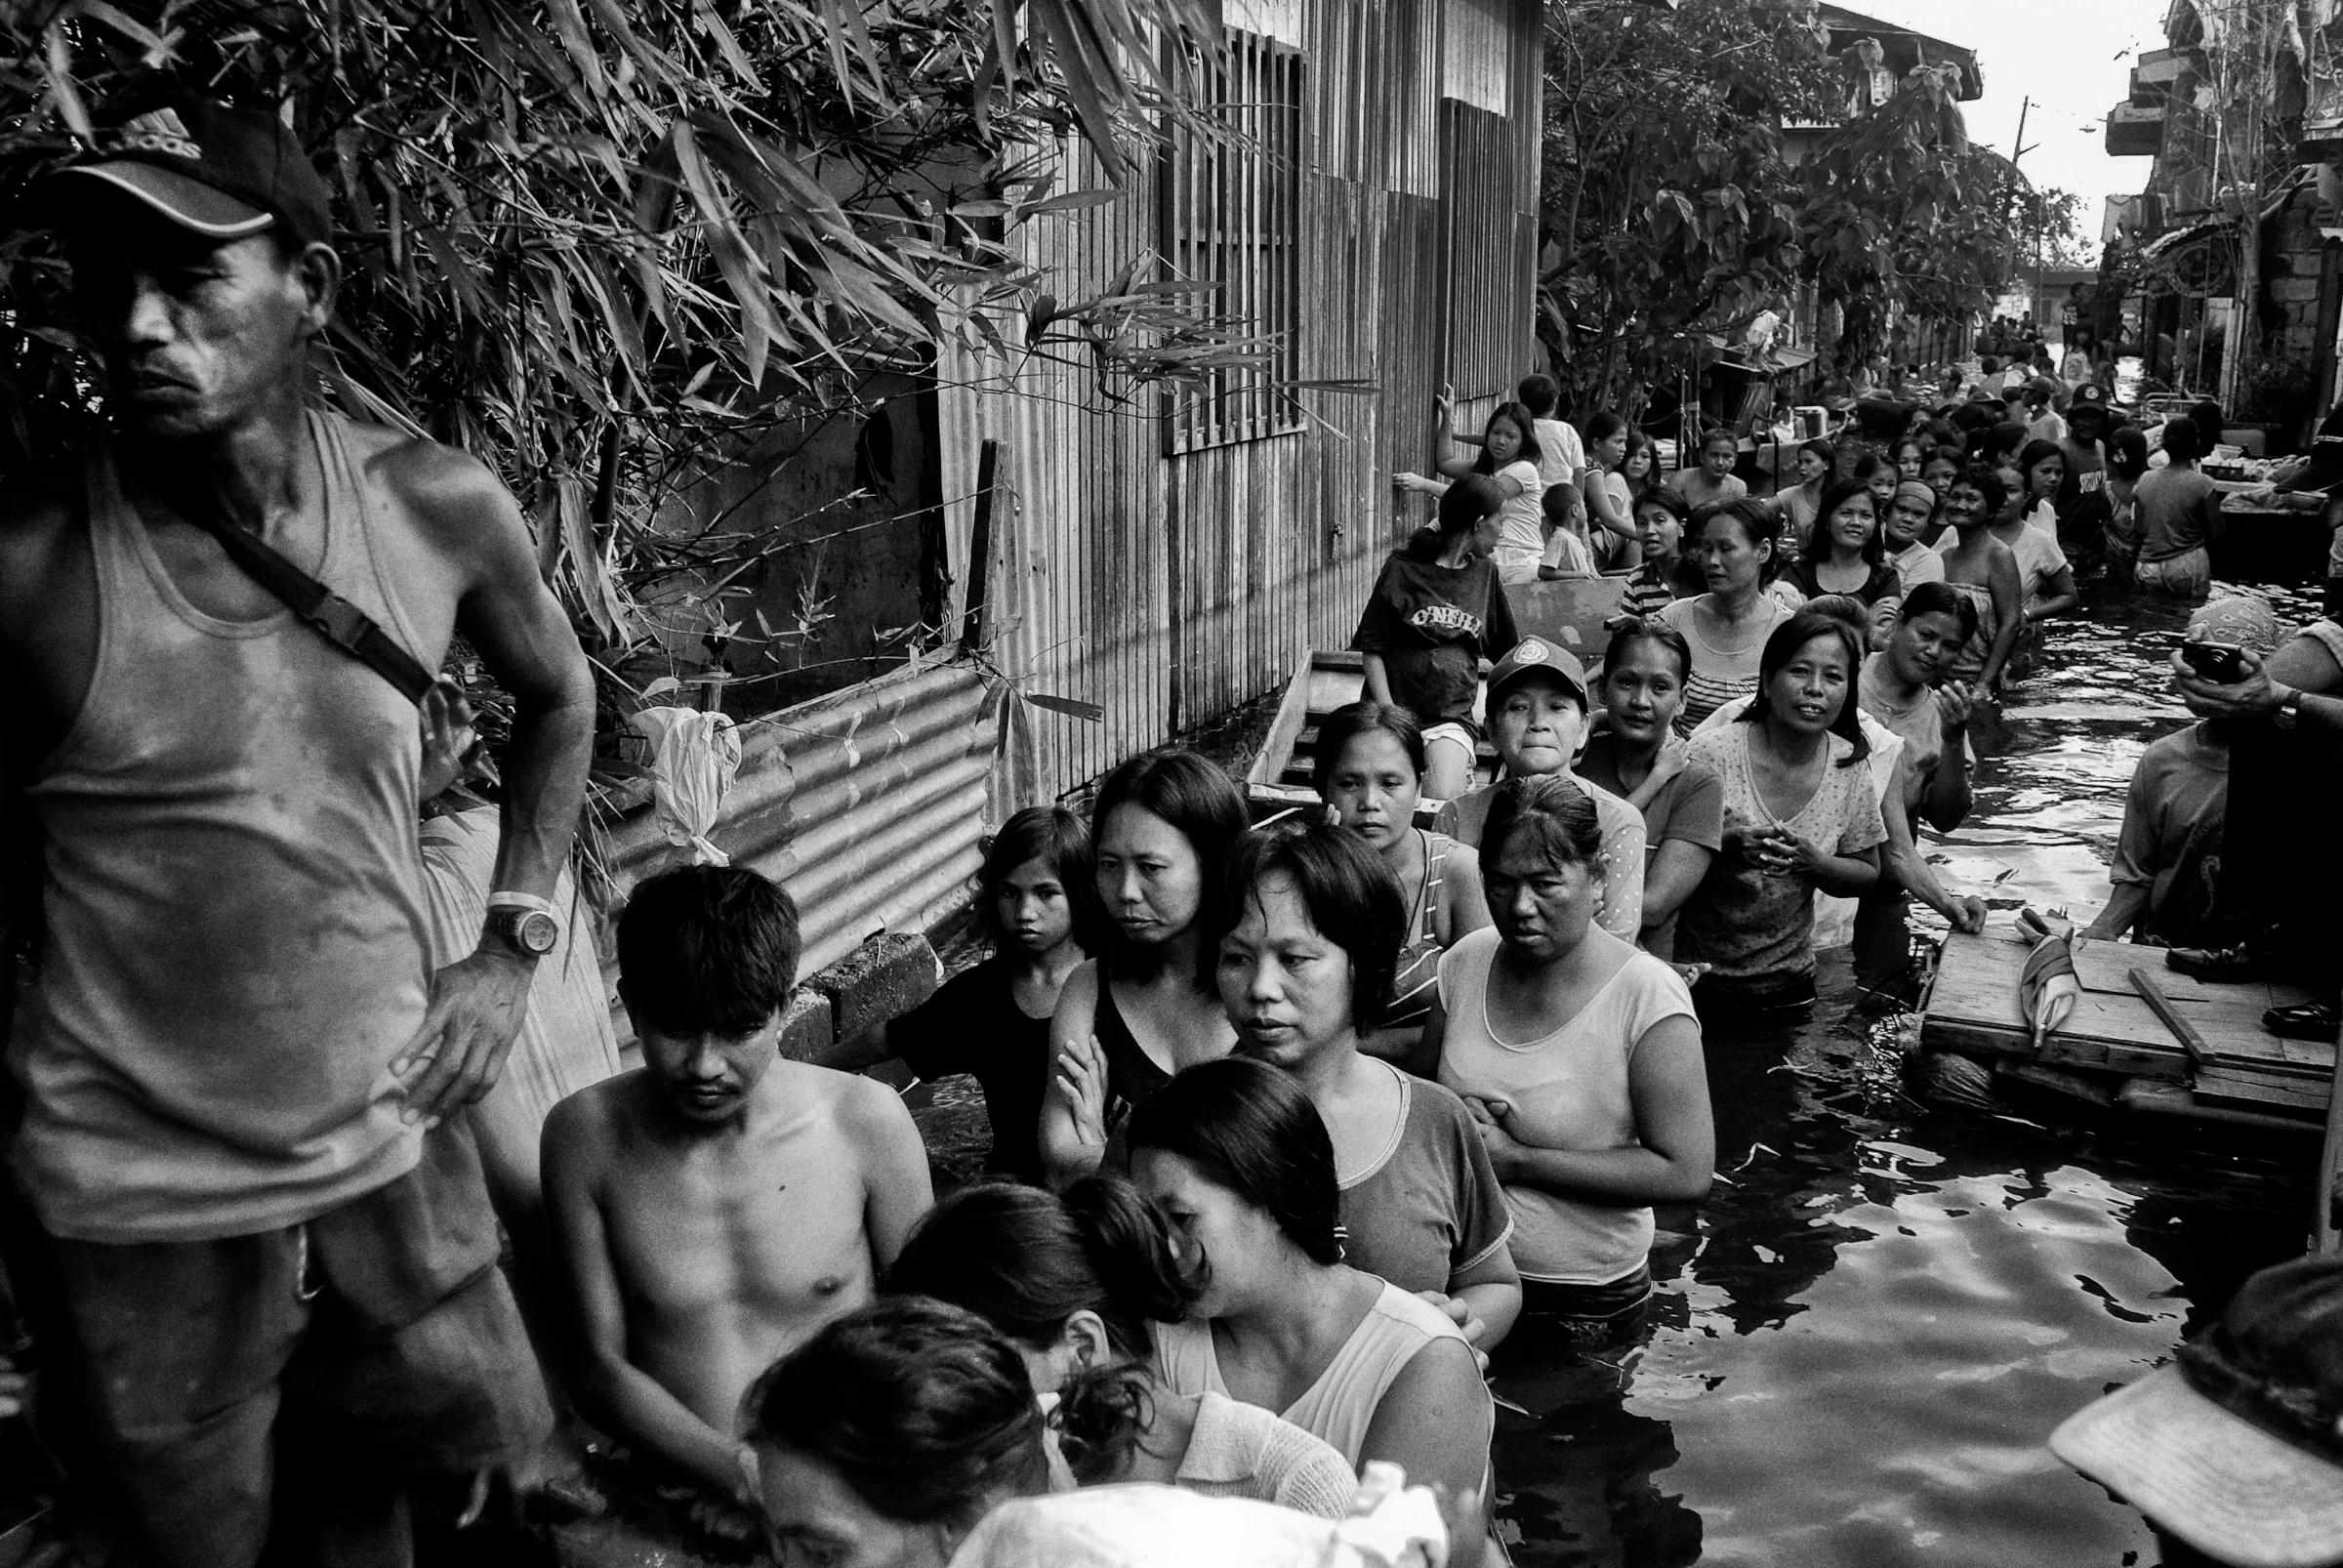 Relief packs are distributed in a flooded district of Taguig, Phillipines on Oct. 12, 2009. Typhoon Ketsana, known in the Philippines as Tropical Storm Ondoy, devastated the region in 2009.